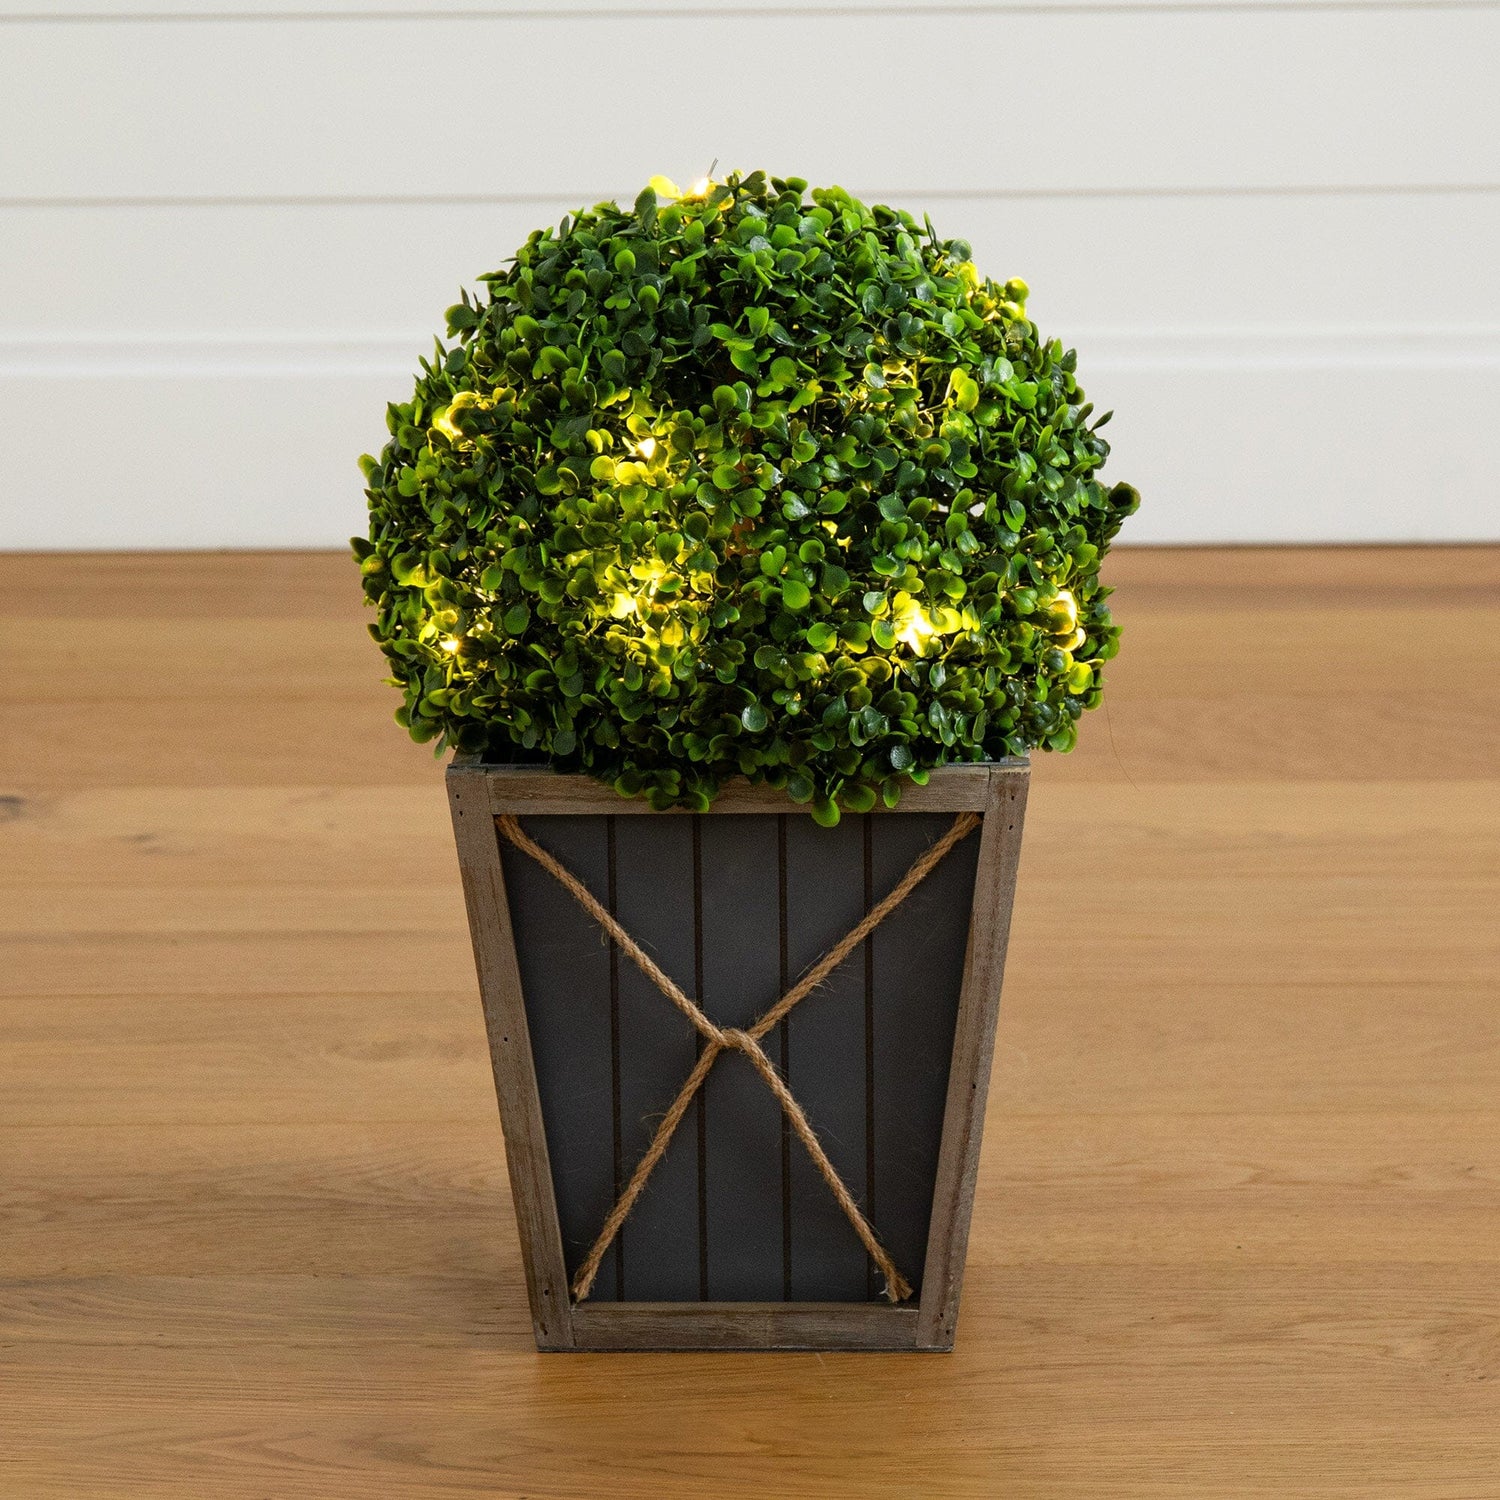 18” UV Resistant Artificial Boxwood Ball Topiary with LED Lights in Decorative Planter (Indoor/Outdoor)